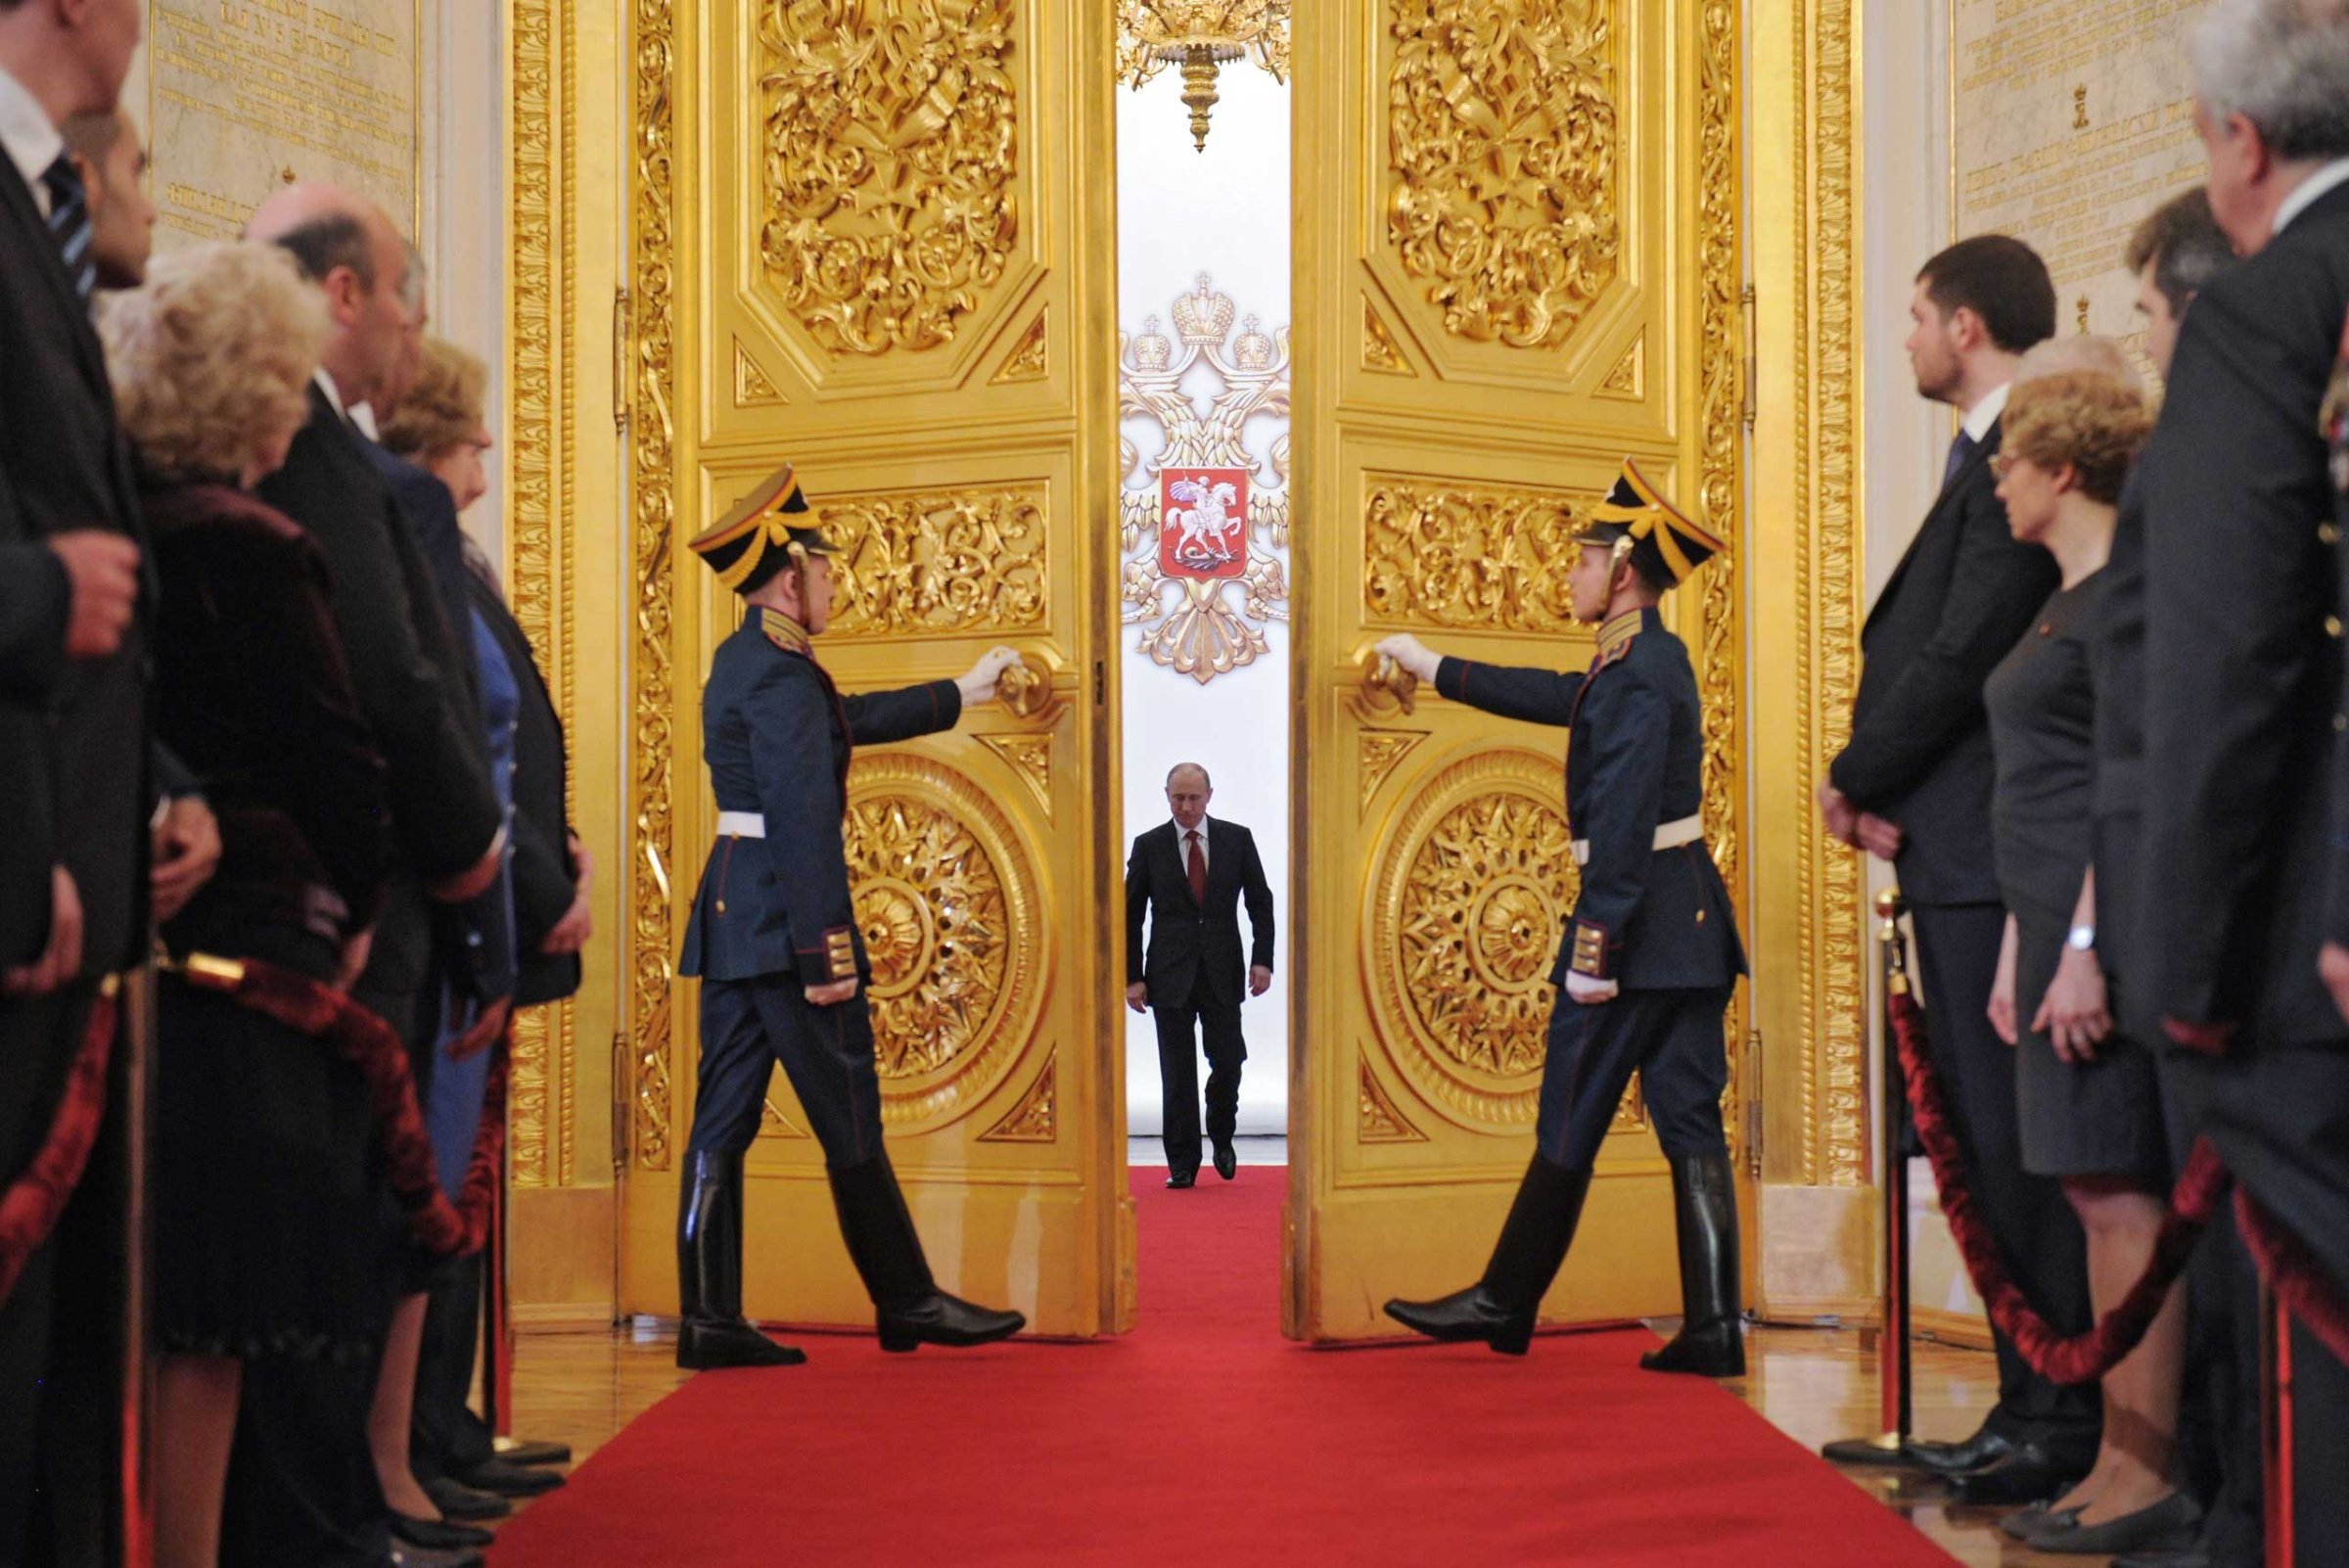 President Putin at the Great Kremlin Palace in Moscow on May 7, 2012, during his inauguration ceremony.